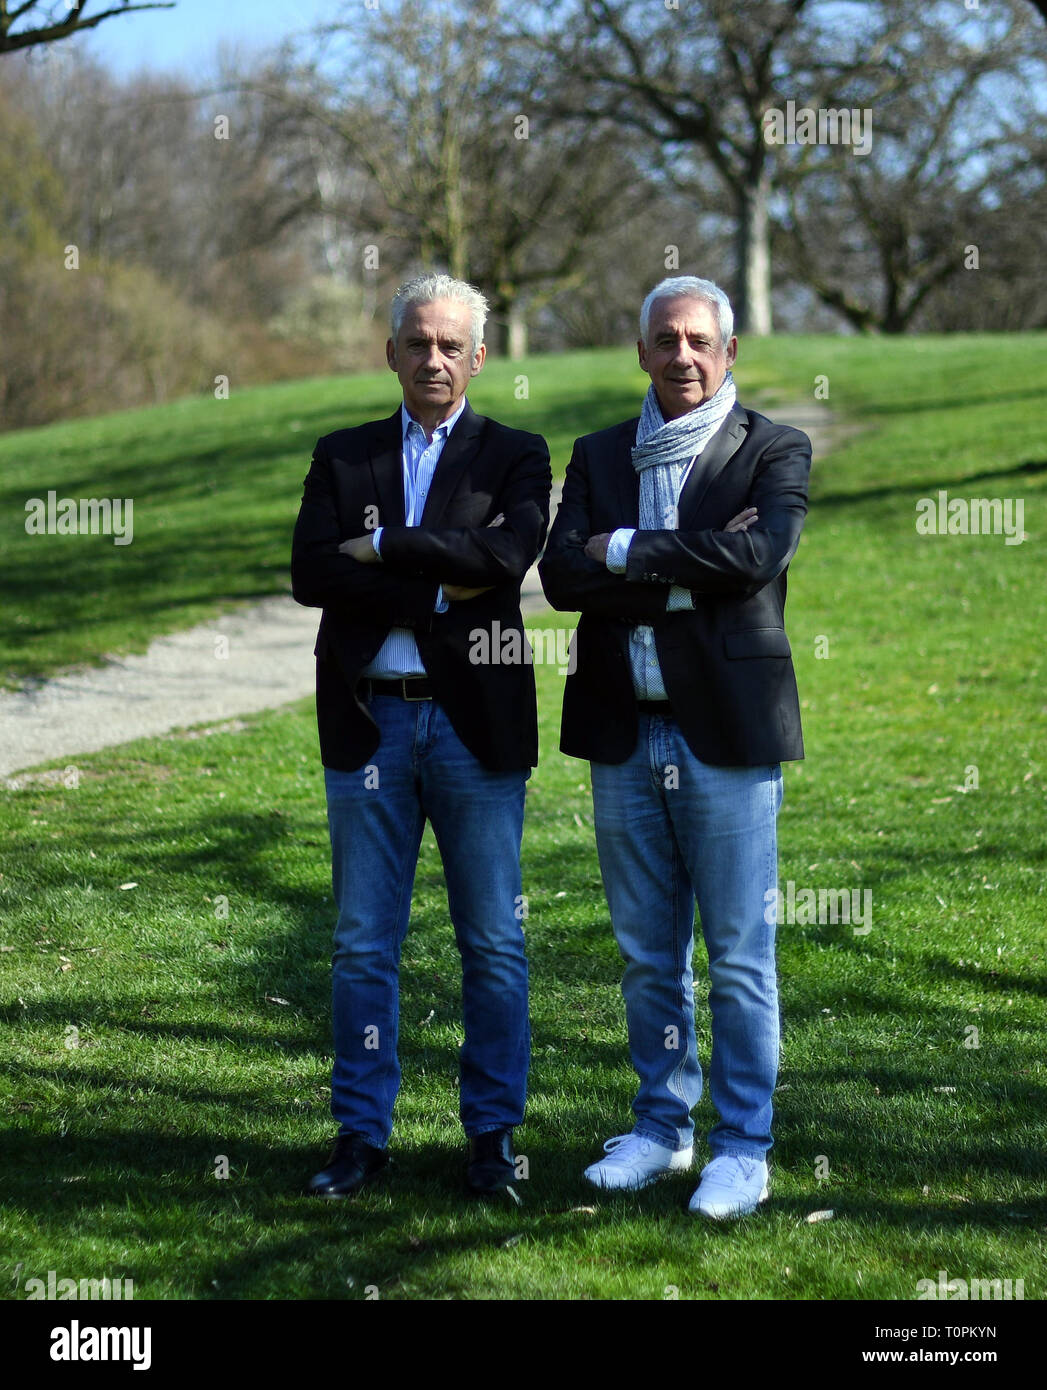 Gelsenkirchen, Germany. 21st Mar, 2019. Erwin (r) and Helmut Kremers are standing on the grounds of the golf club Haus Leythe. The football twins Kremers celebrate their 70th birthday on 24 March 2019. (to dpa popstars of football: The indomitable Kremers twins turn 70 from 22.03.2019) Credit: Ina Fassbender/dpa/Alamy Live News Stock Photo